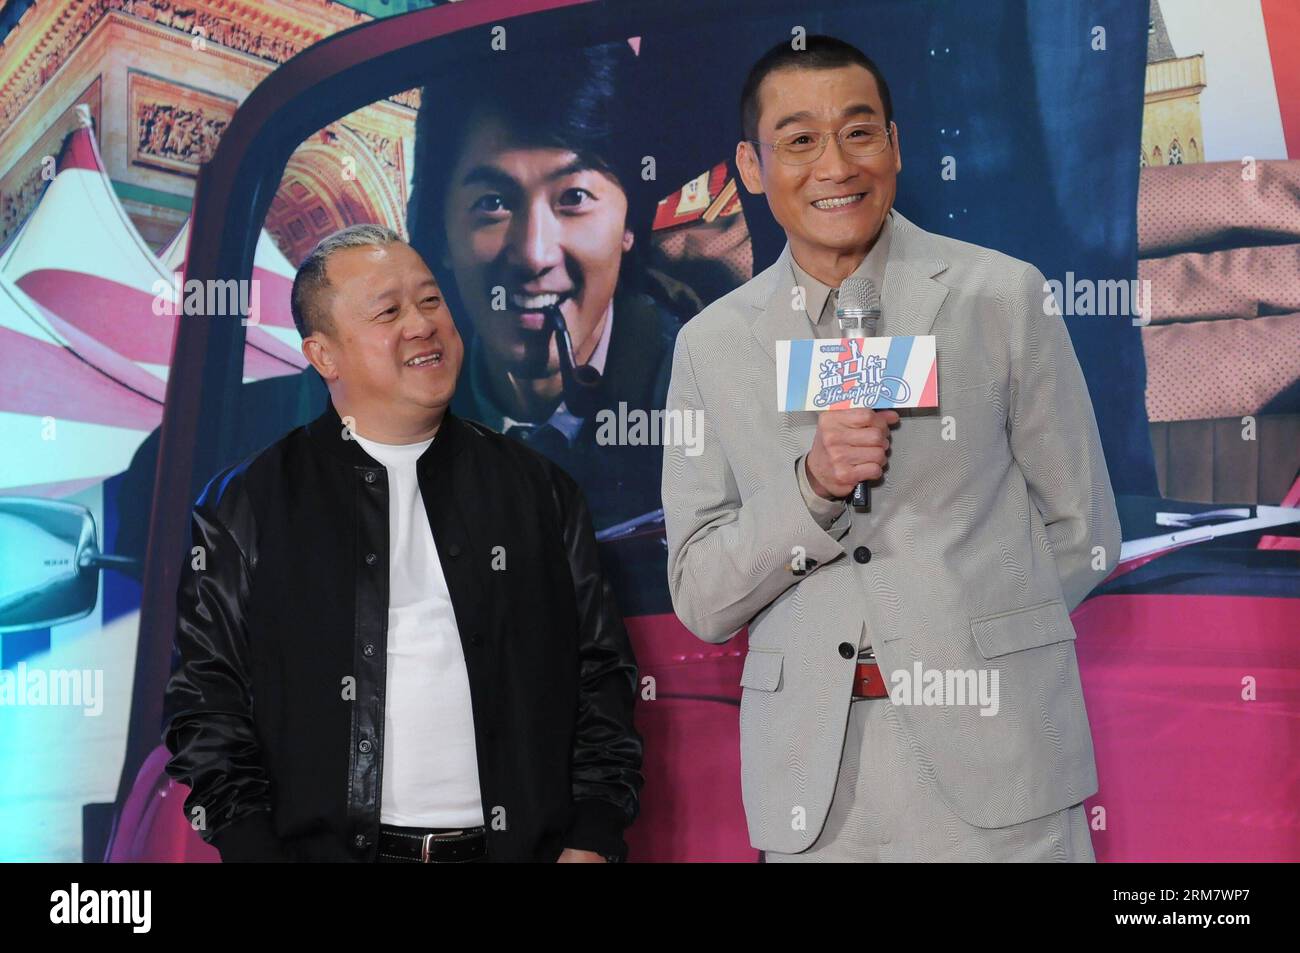 (140317) -- BEIJING, March 16, 2014 (Xinhua) -- Actors Eric Tsang (L) and Tony Leung Ka Fai speak during the premiere of the movie Horseplay in Beijing, capital of China, March 16, 2014. The movie Horseplay will hit the screen across the county on March 21. (Xinhua) (cjq) CHINA-BEIJING-MOVIE PREMIERE-HORSEPLAY (CN) PUBLICATIONxNOTxINxCHN   Beijing March 16 2014 XINHUA Actors Eric Tsang l and Tony Leung Ka Fai speak during The Premiere of The Movie  in Beijing Capital of China March 16 2014 The Movie  will Hit The Screen across The County ON March 21 XINHUA  China Beijing Movie Premiere  CN PUB Stock Photo